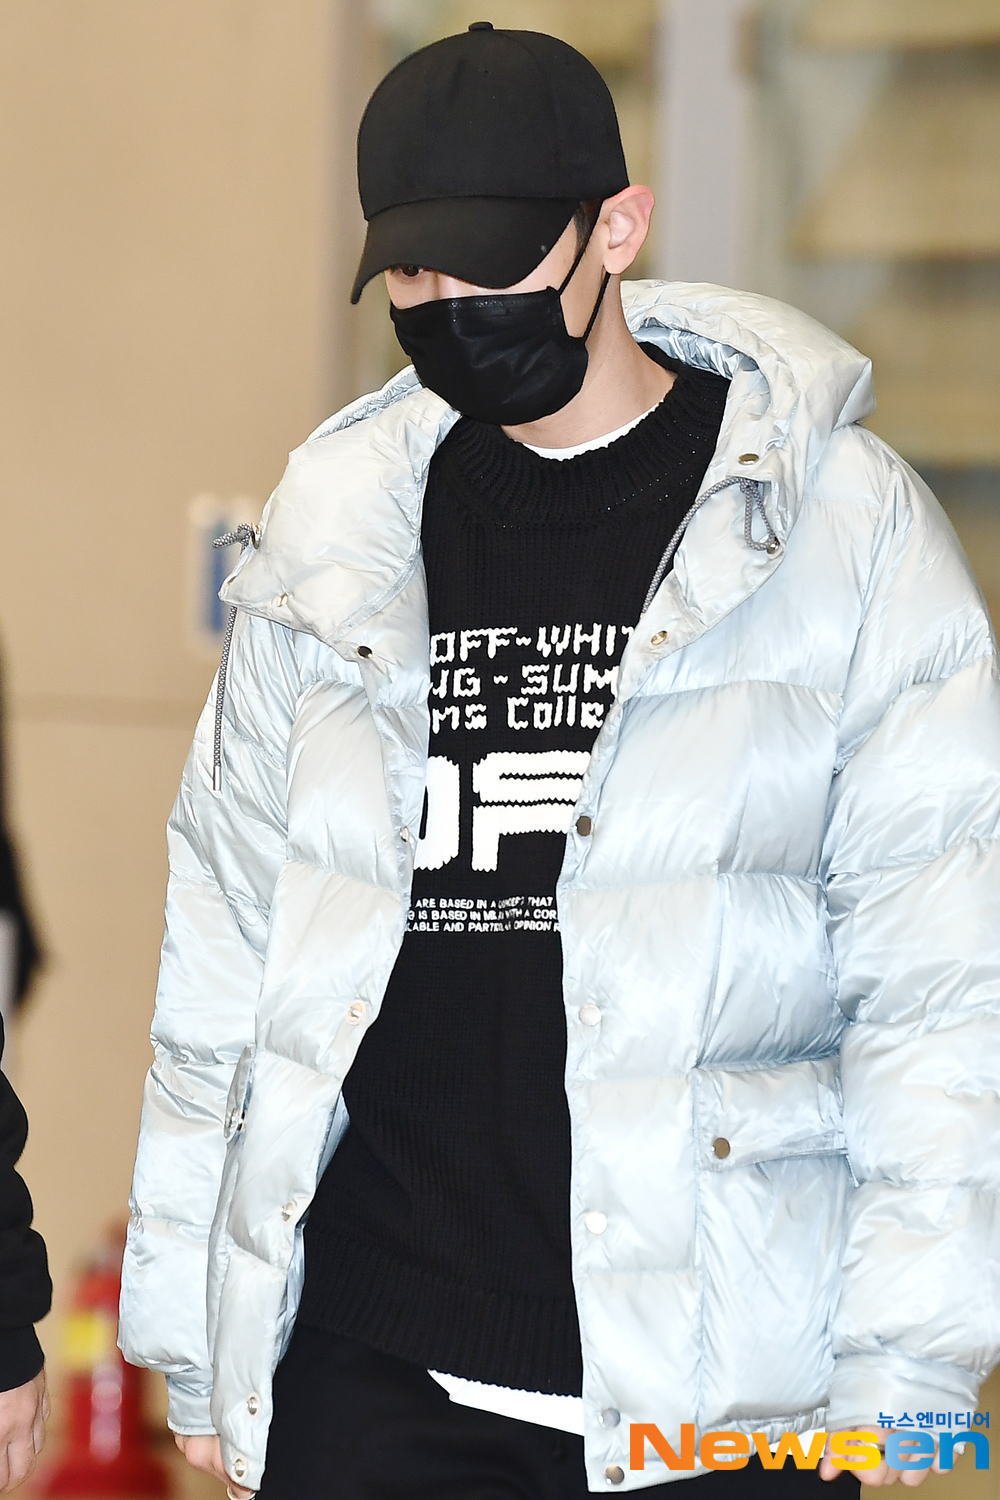 EXO (EXO) member Chanyeol (CHANYEOL) arrives at the Incheon International Airport in Unseo-dong, Jung-gu, Incheon, after completing an overseas schedule on the morning of January 24.exponential earthquake